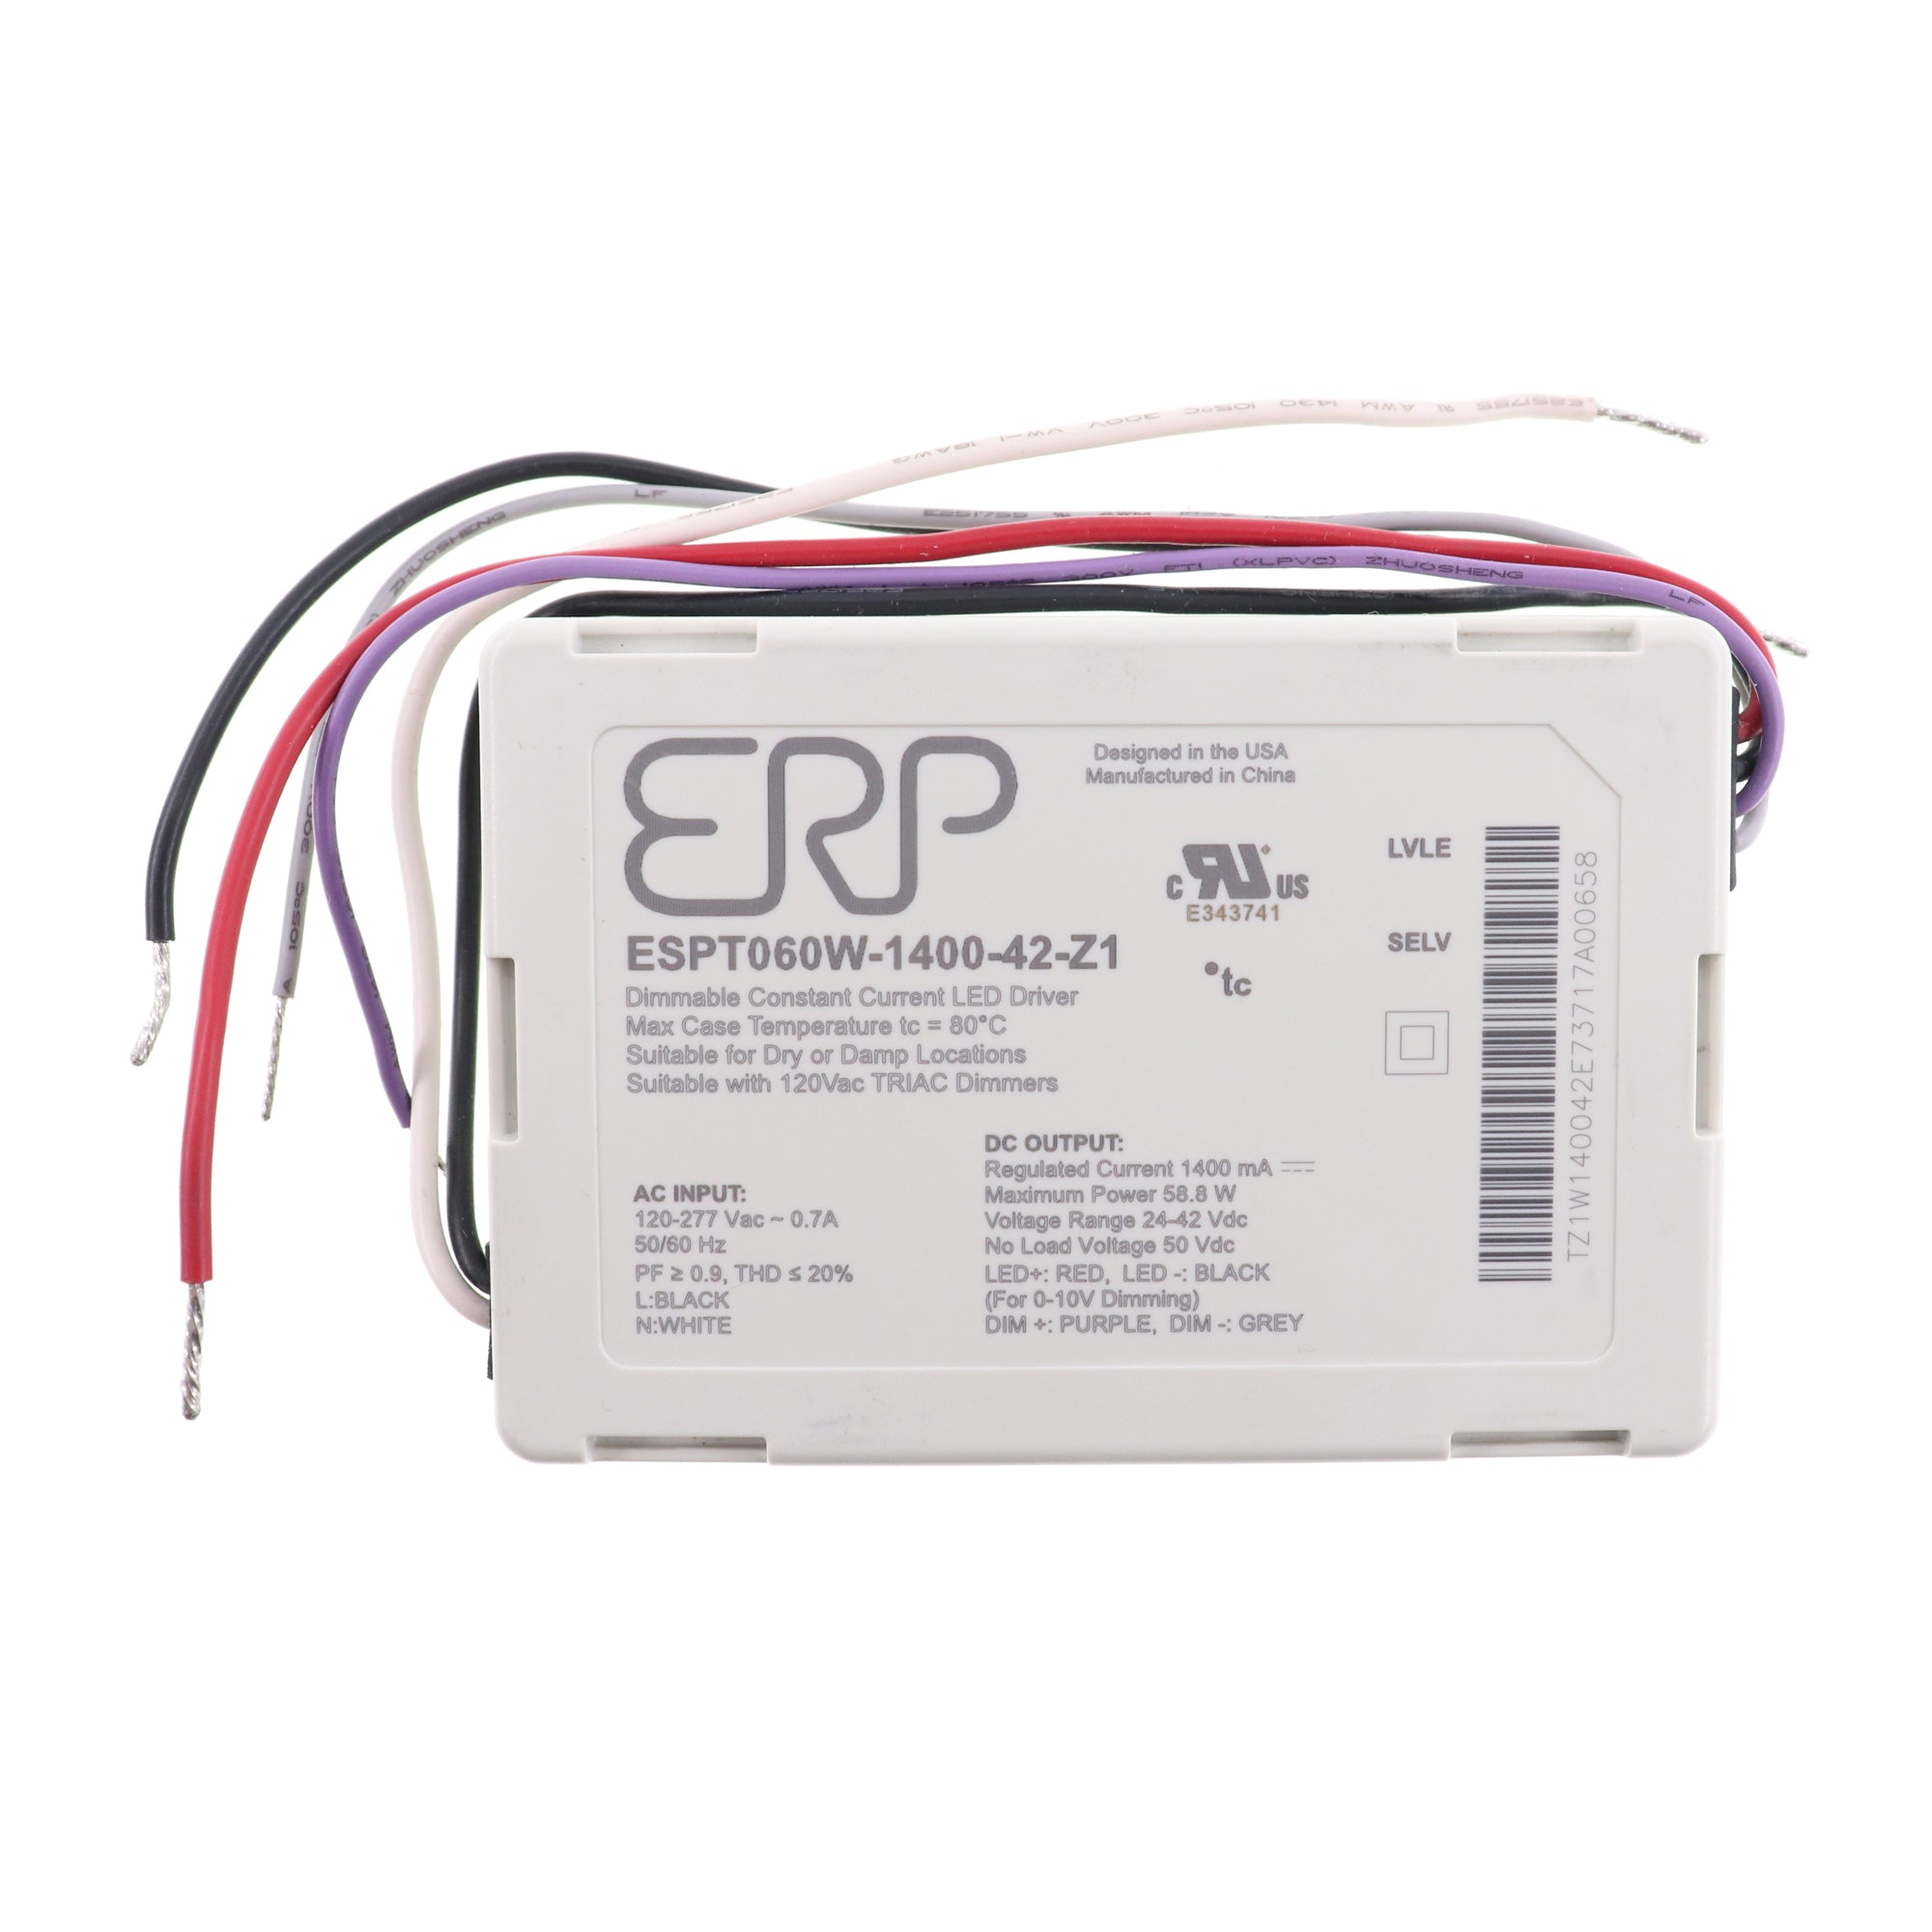 ERP, ERP ESTP060W-1400-42-Z1 DIMMABLE CONSTANT CURRENT LED DRIVER, 1400MA 58W, 24-42V